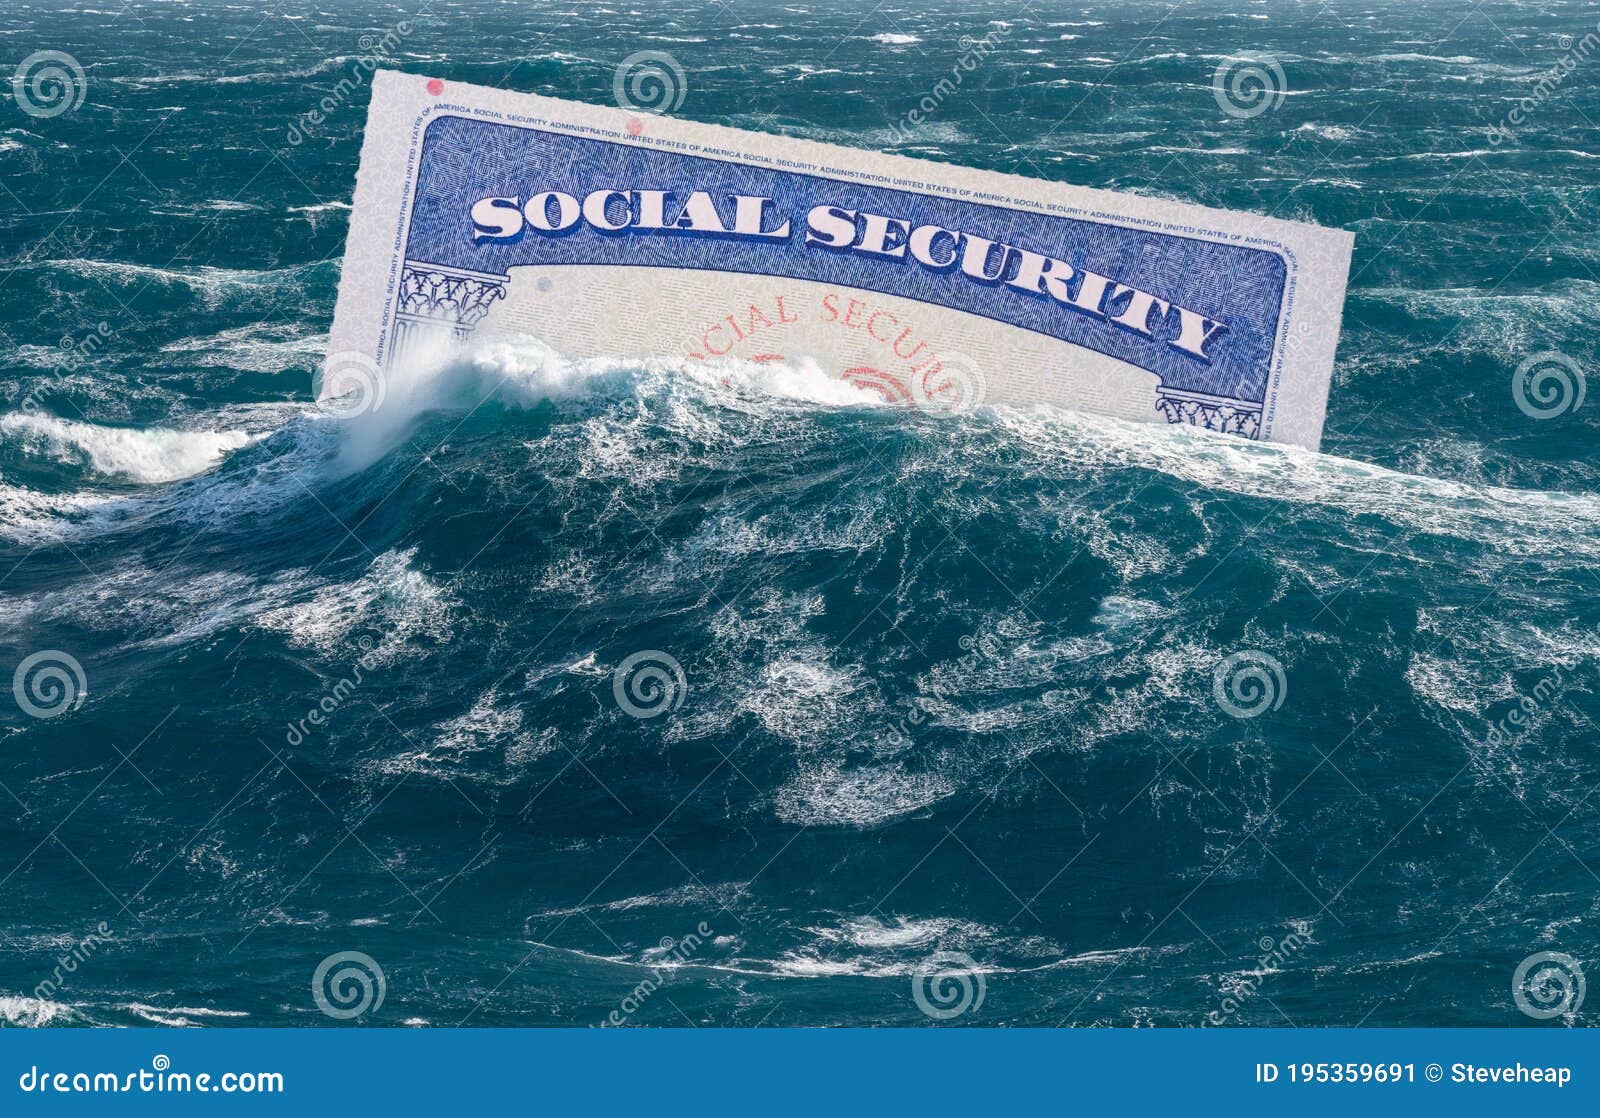 concept of social security trust fund being in danger of exhaustion and sinking underwater